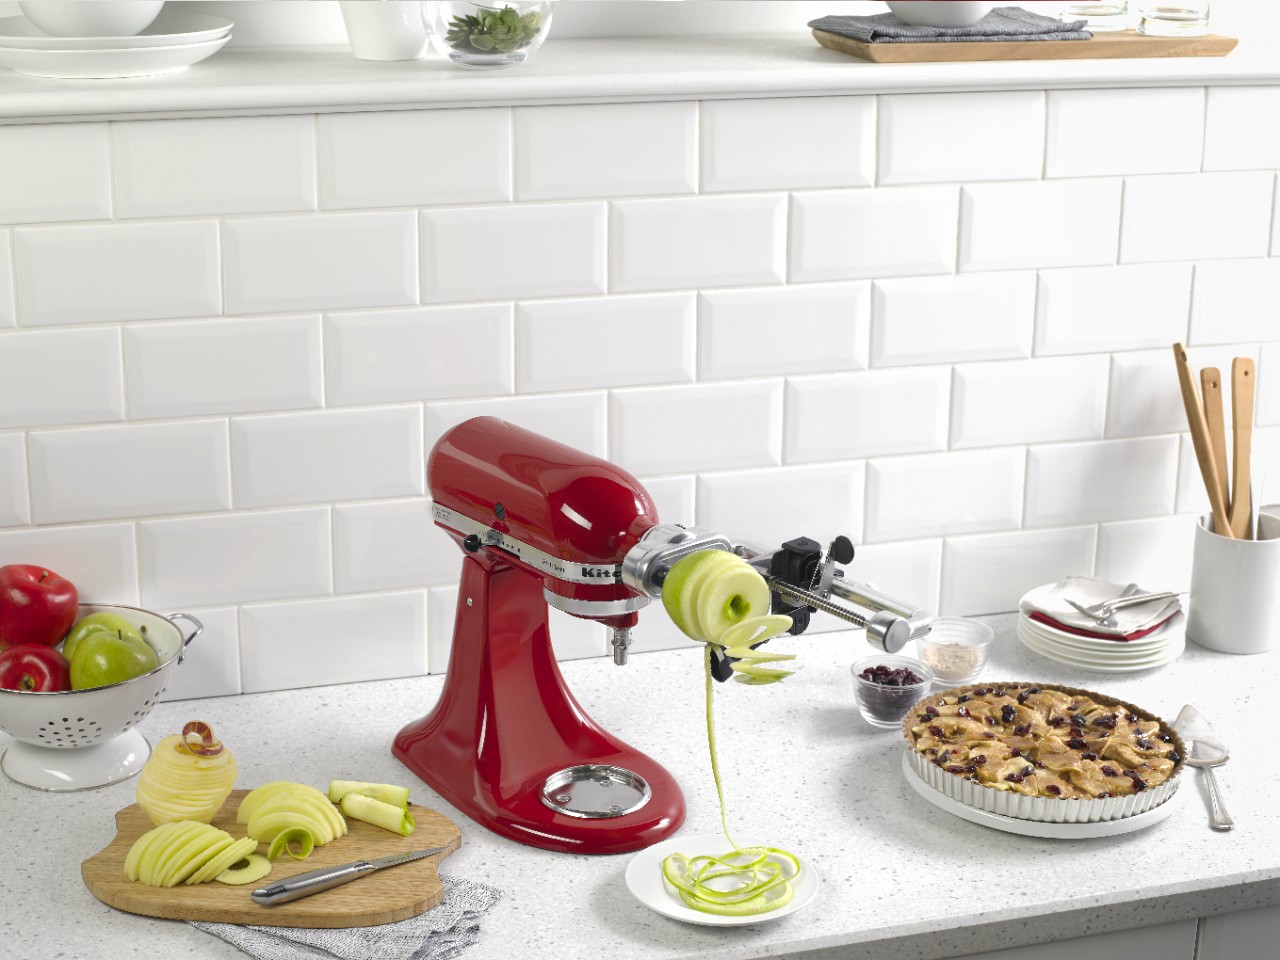 Discover how Yummly can enhance your KitchenAid experience